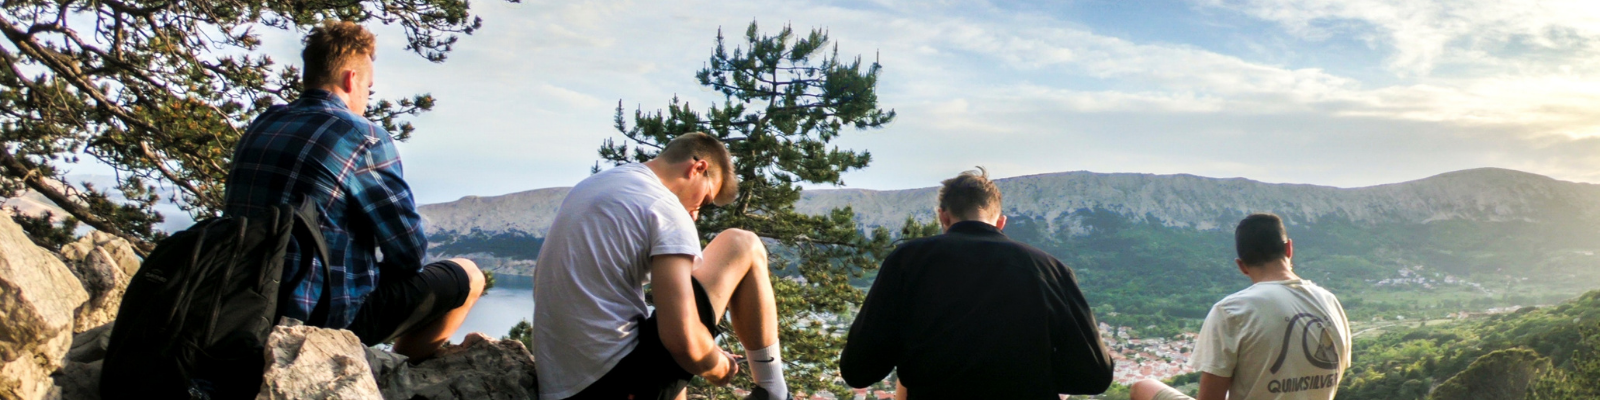 four men sit after a hike looking at the landscape of mountains